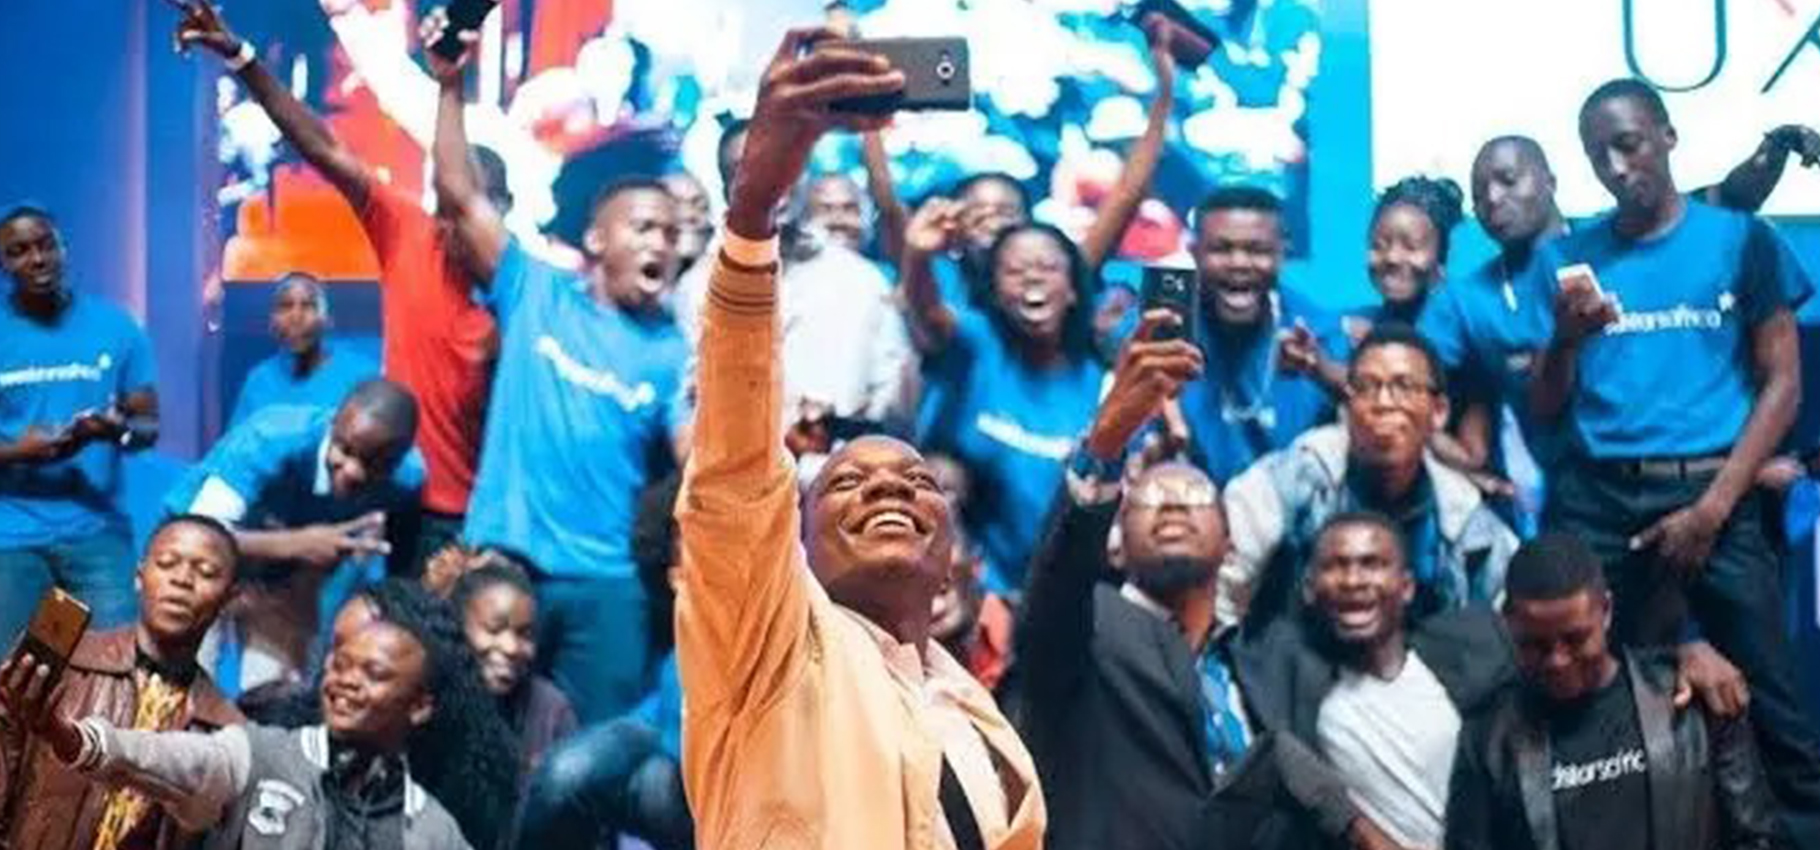 African startups to benefit from Seedstars’ $20m investment. 2 other stories and a trivia